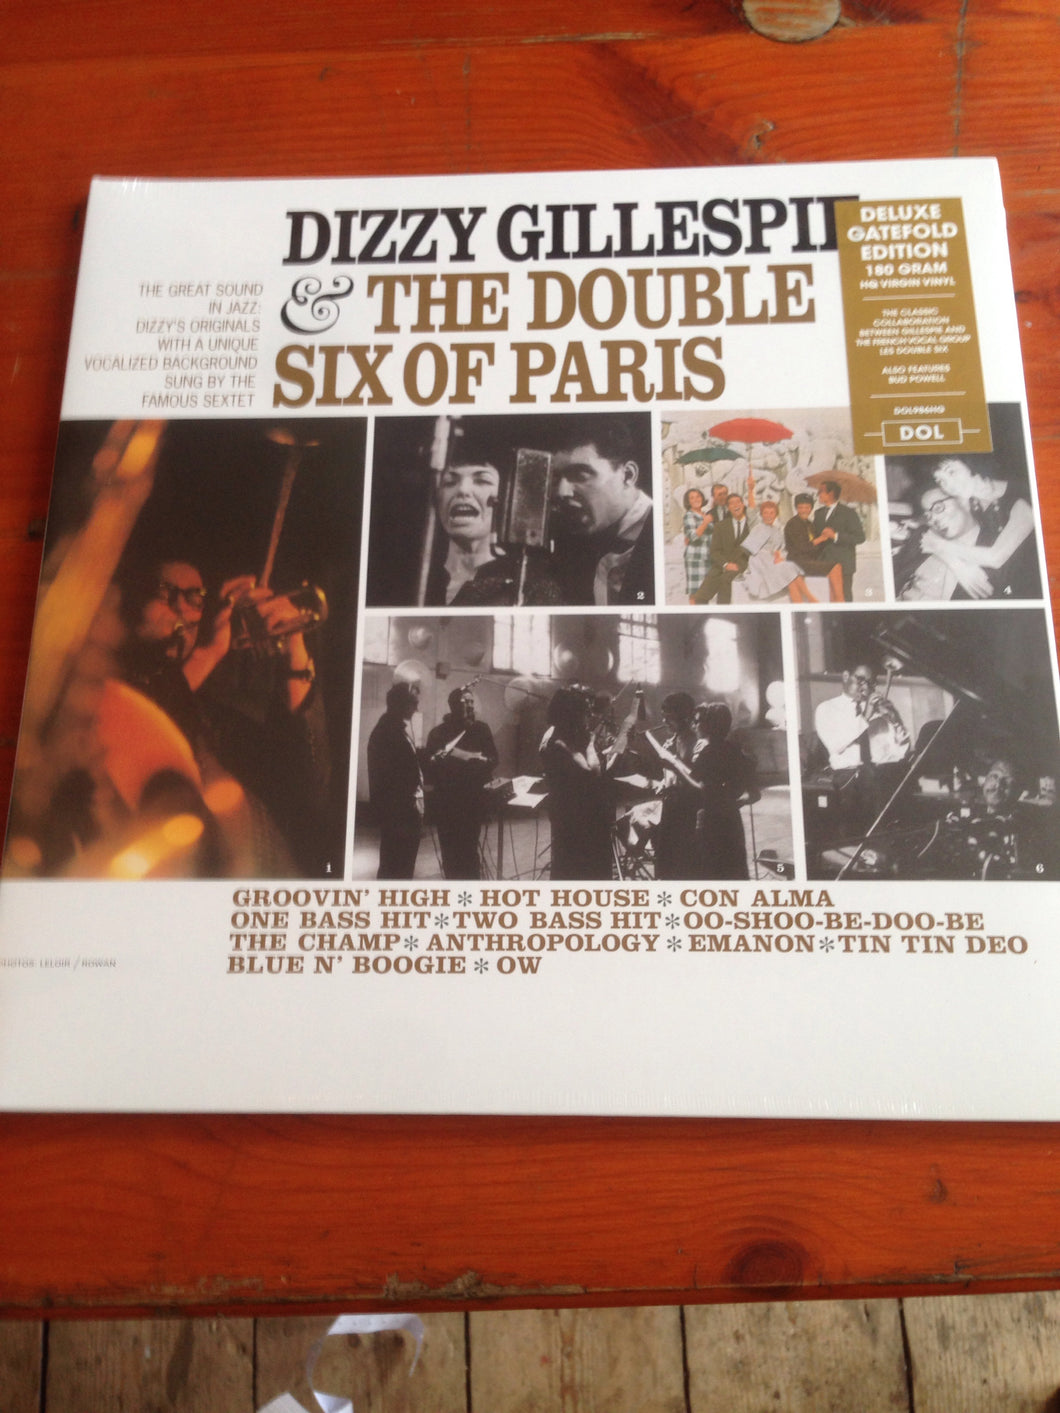 Dizzy Gillespie and The Double Six of Paris